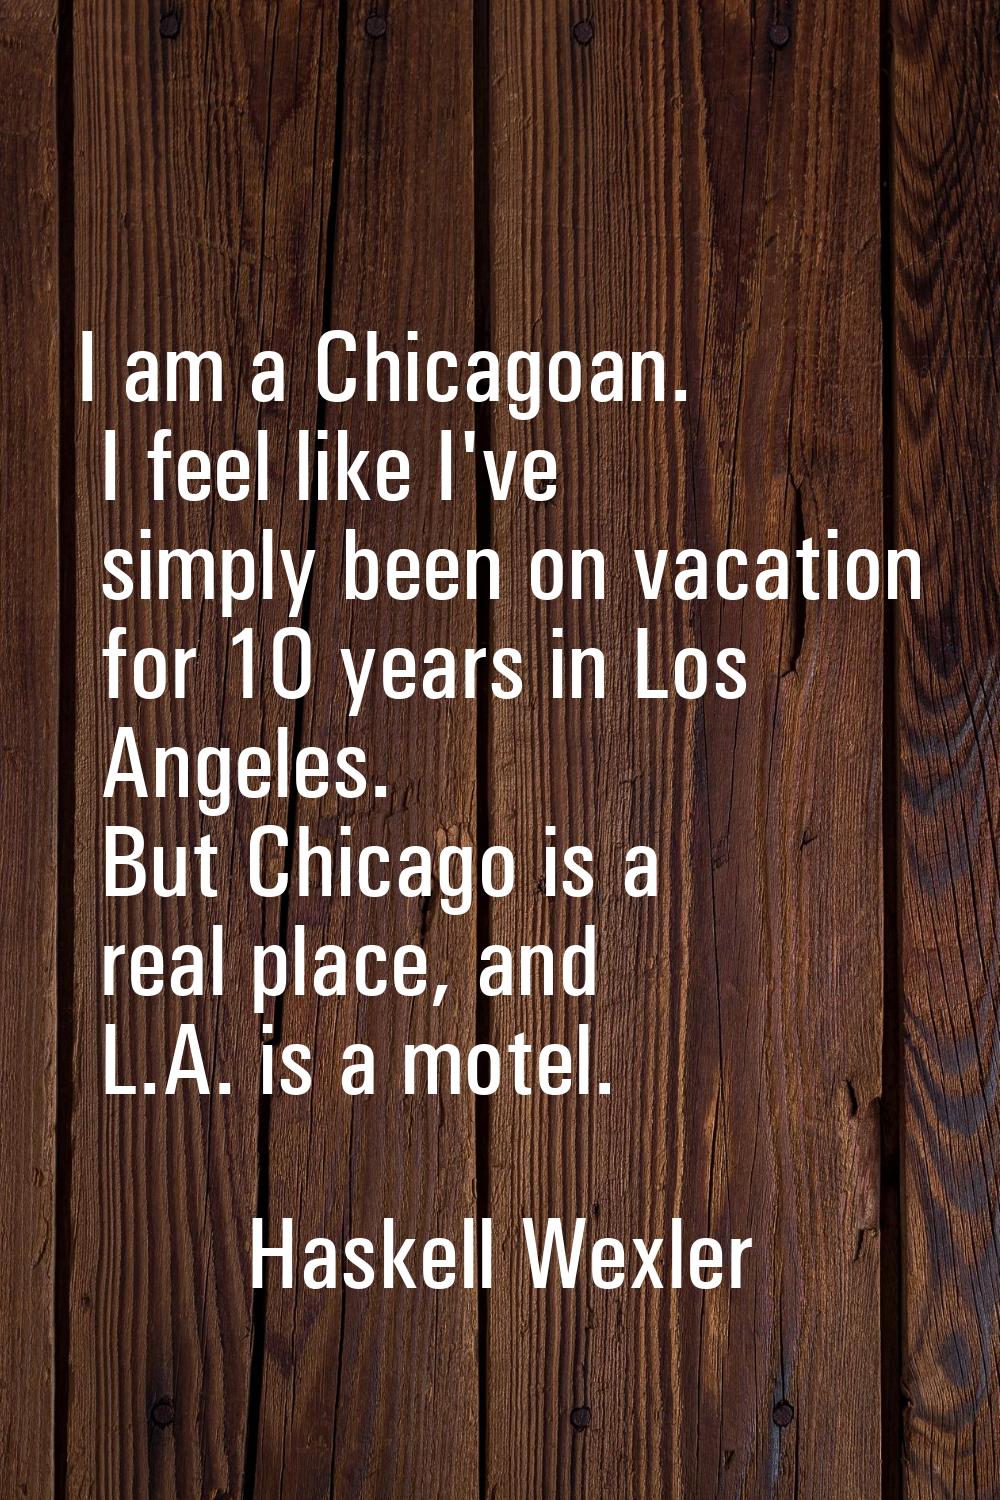 I am a Chicagoan. I feel like I've simply been on vacation for 10 years in Los Angeles. But Chicago